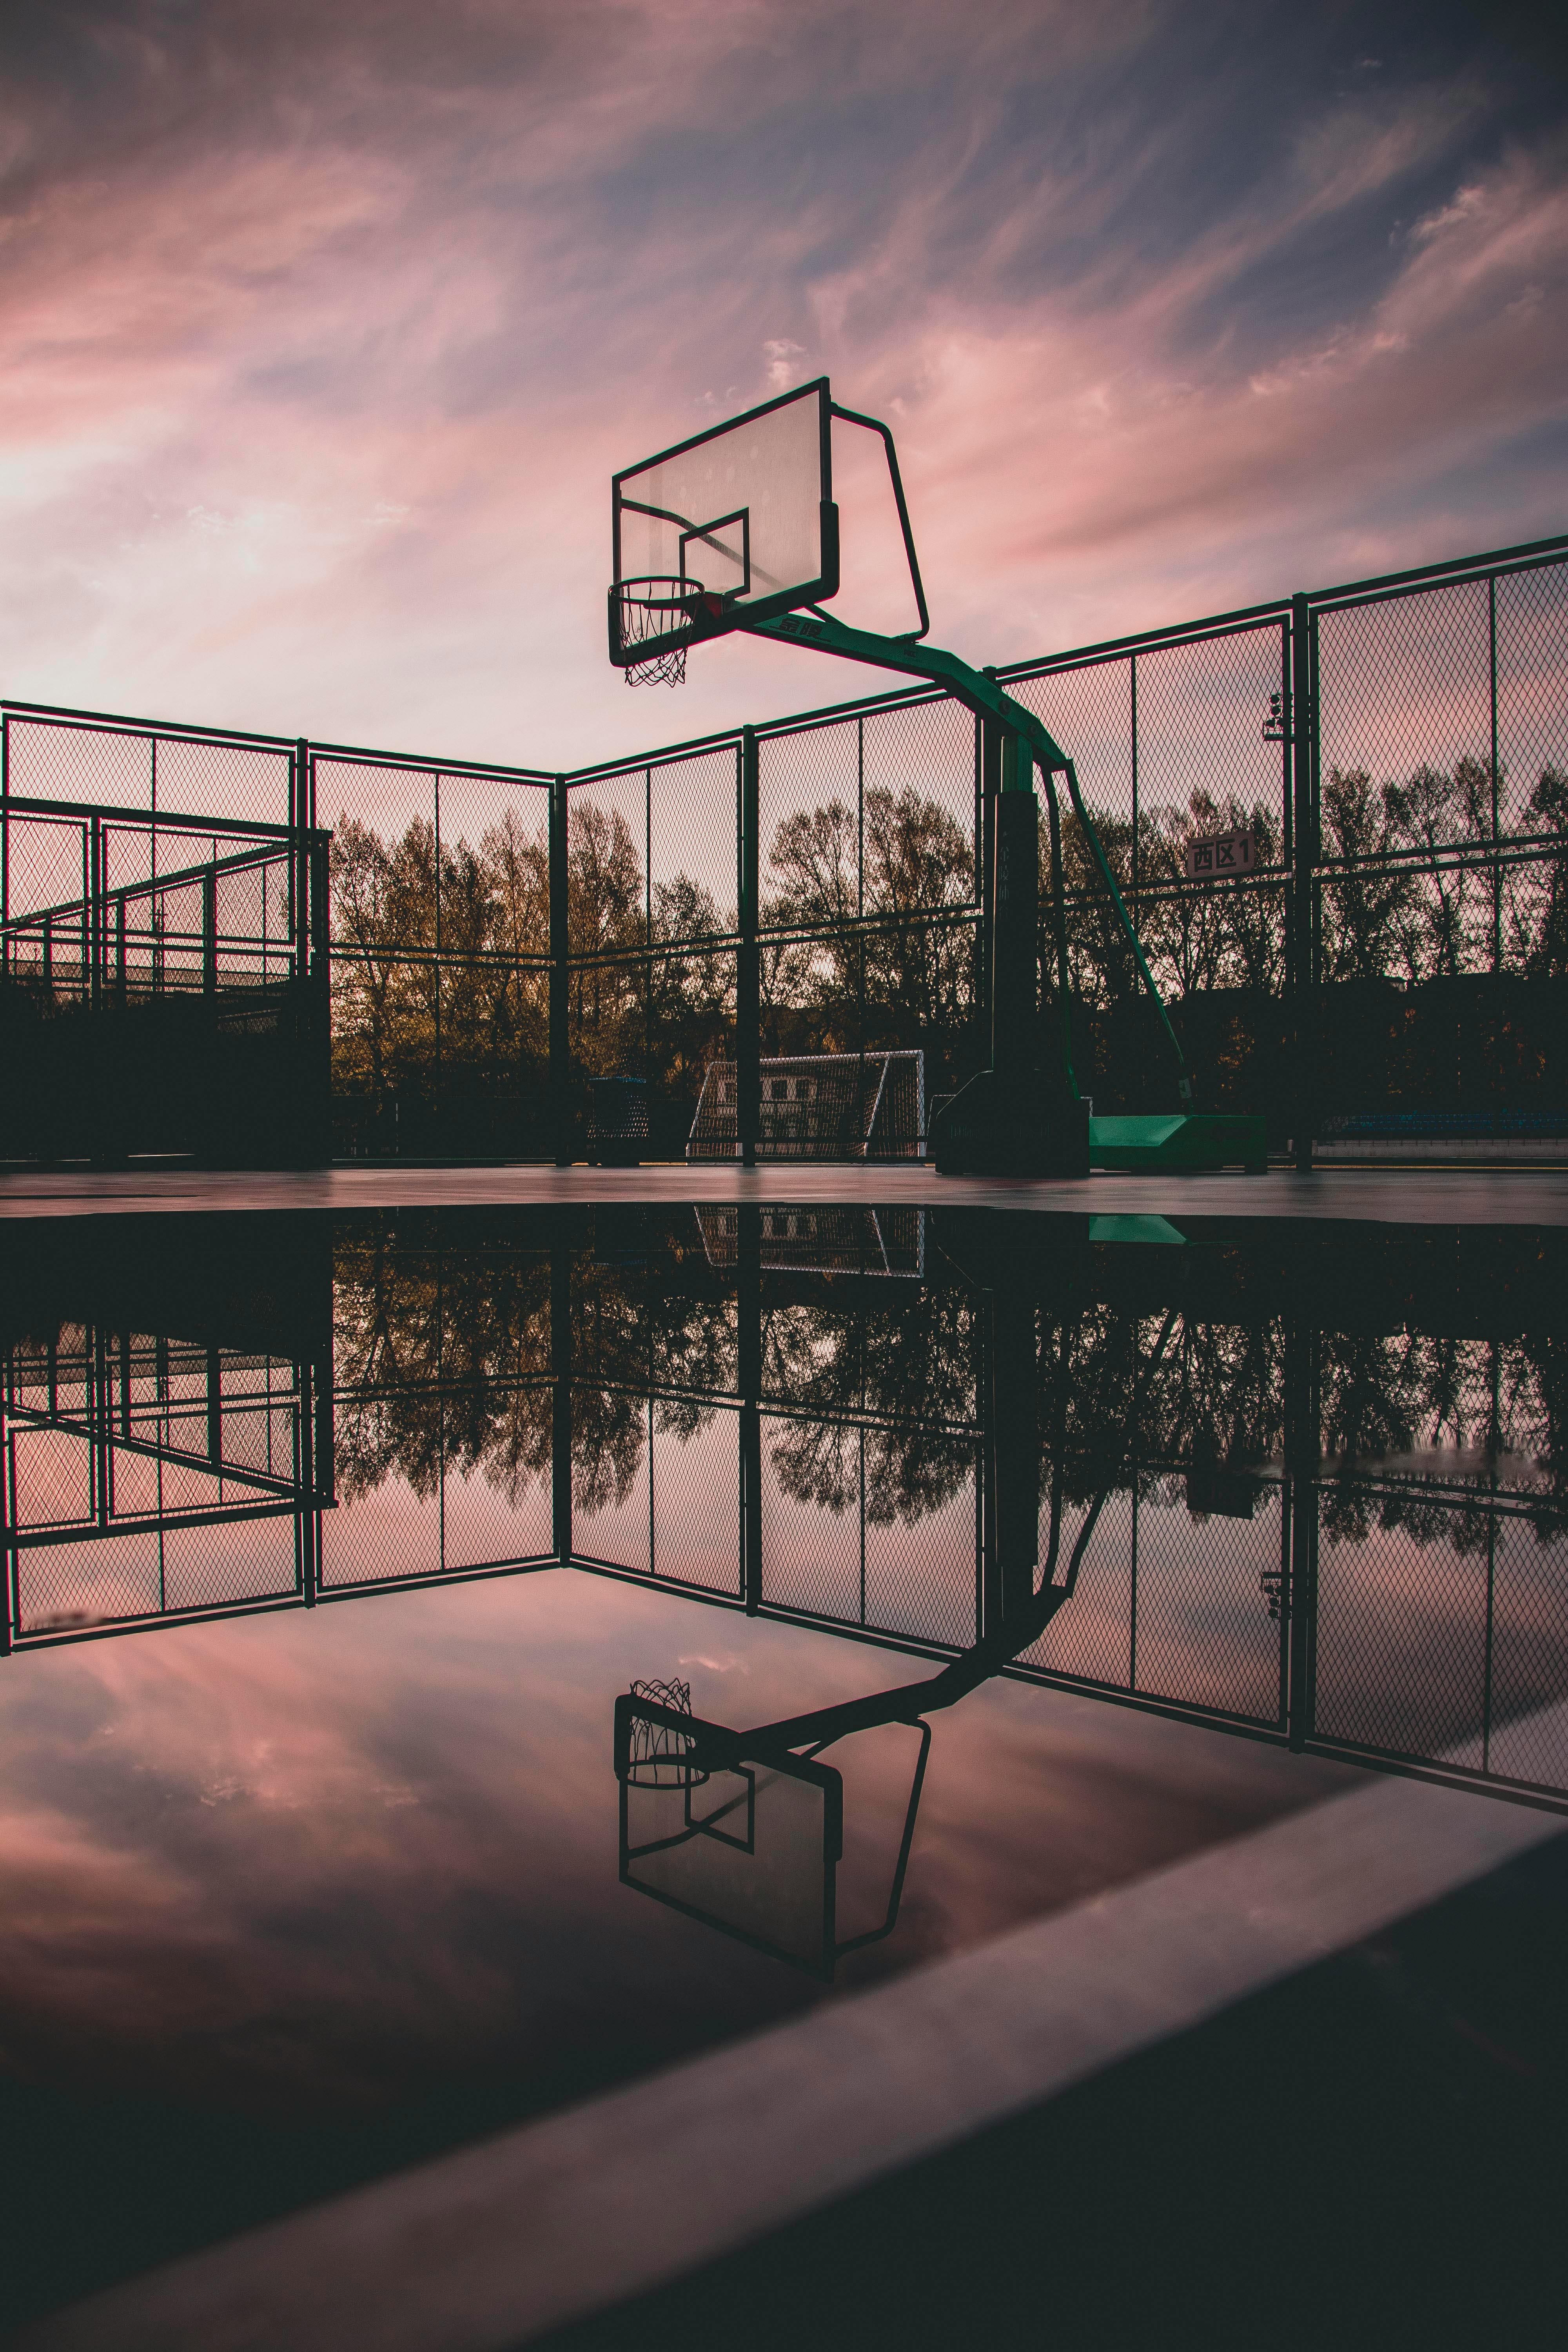 cool basketball court backgrounds hd